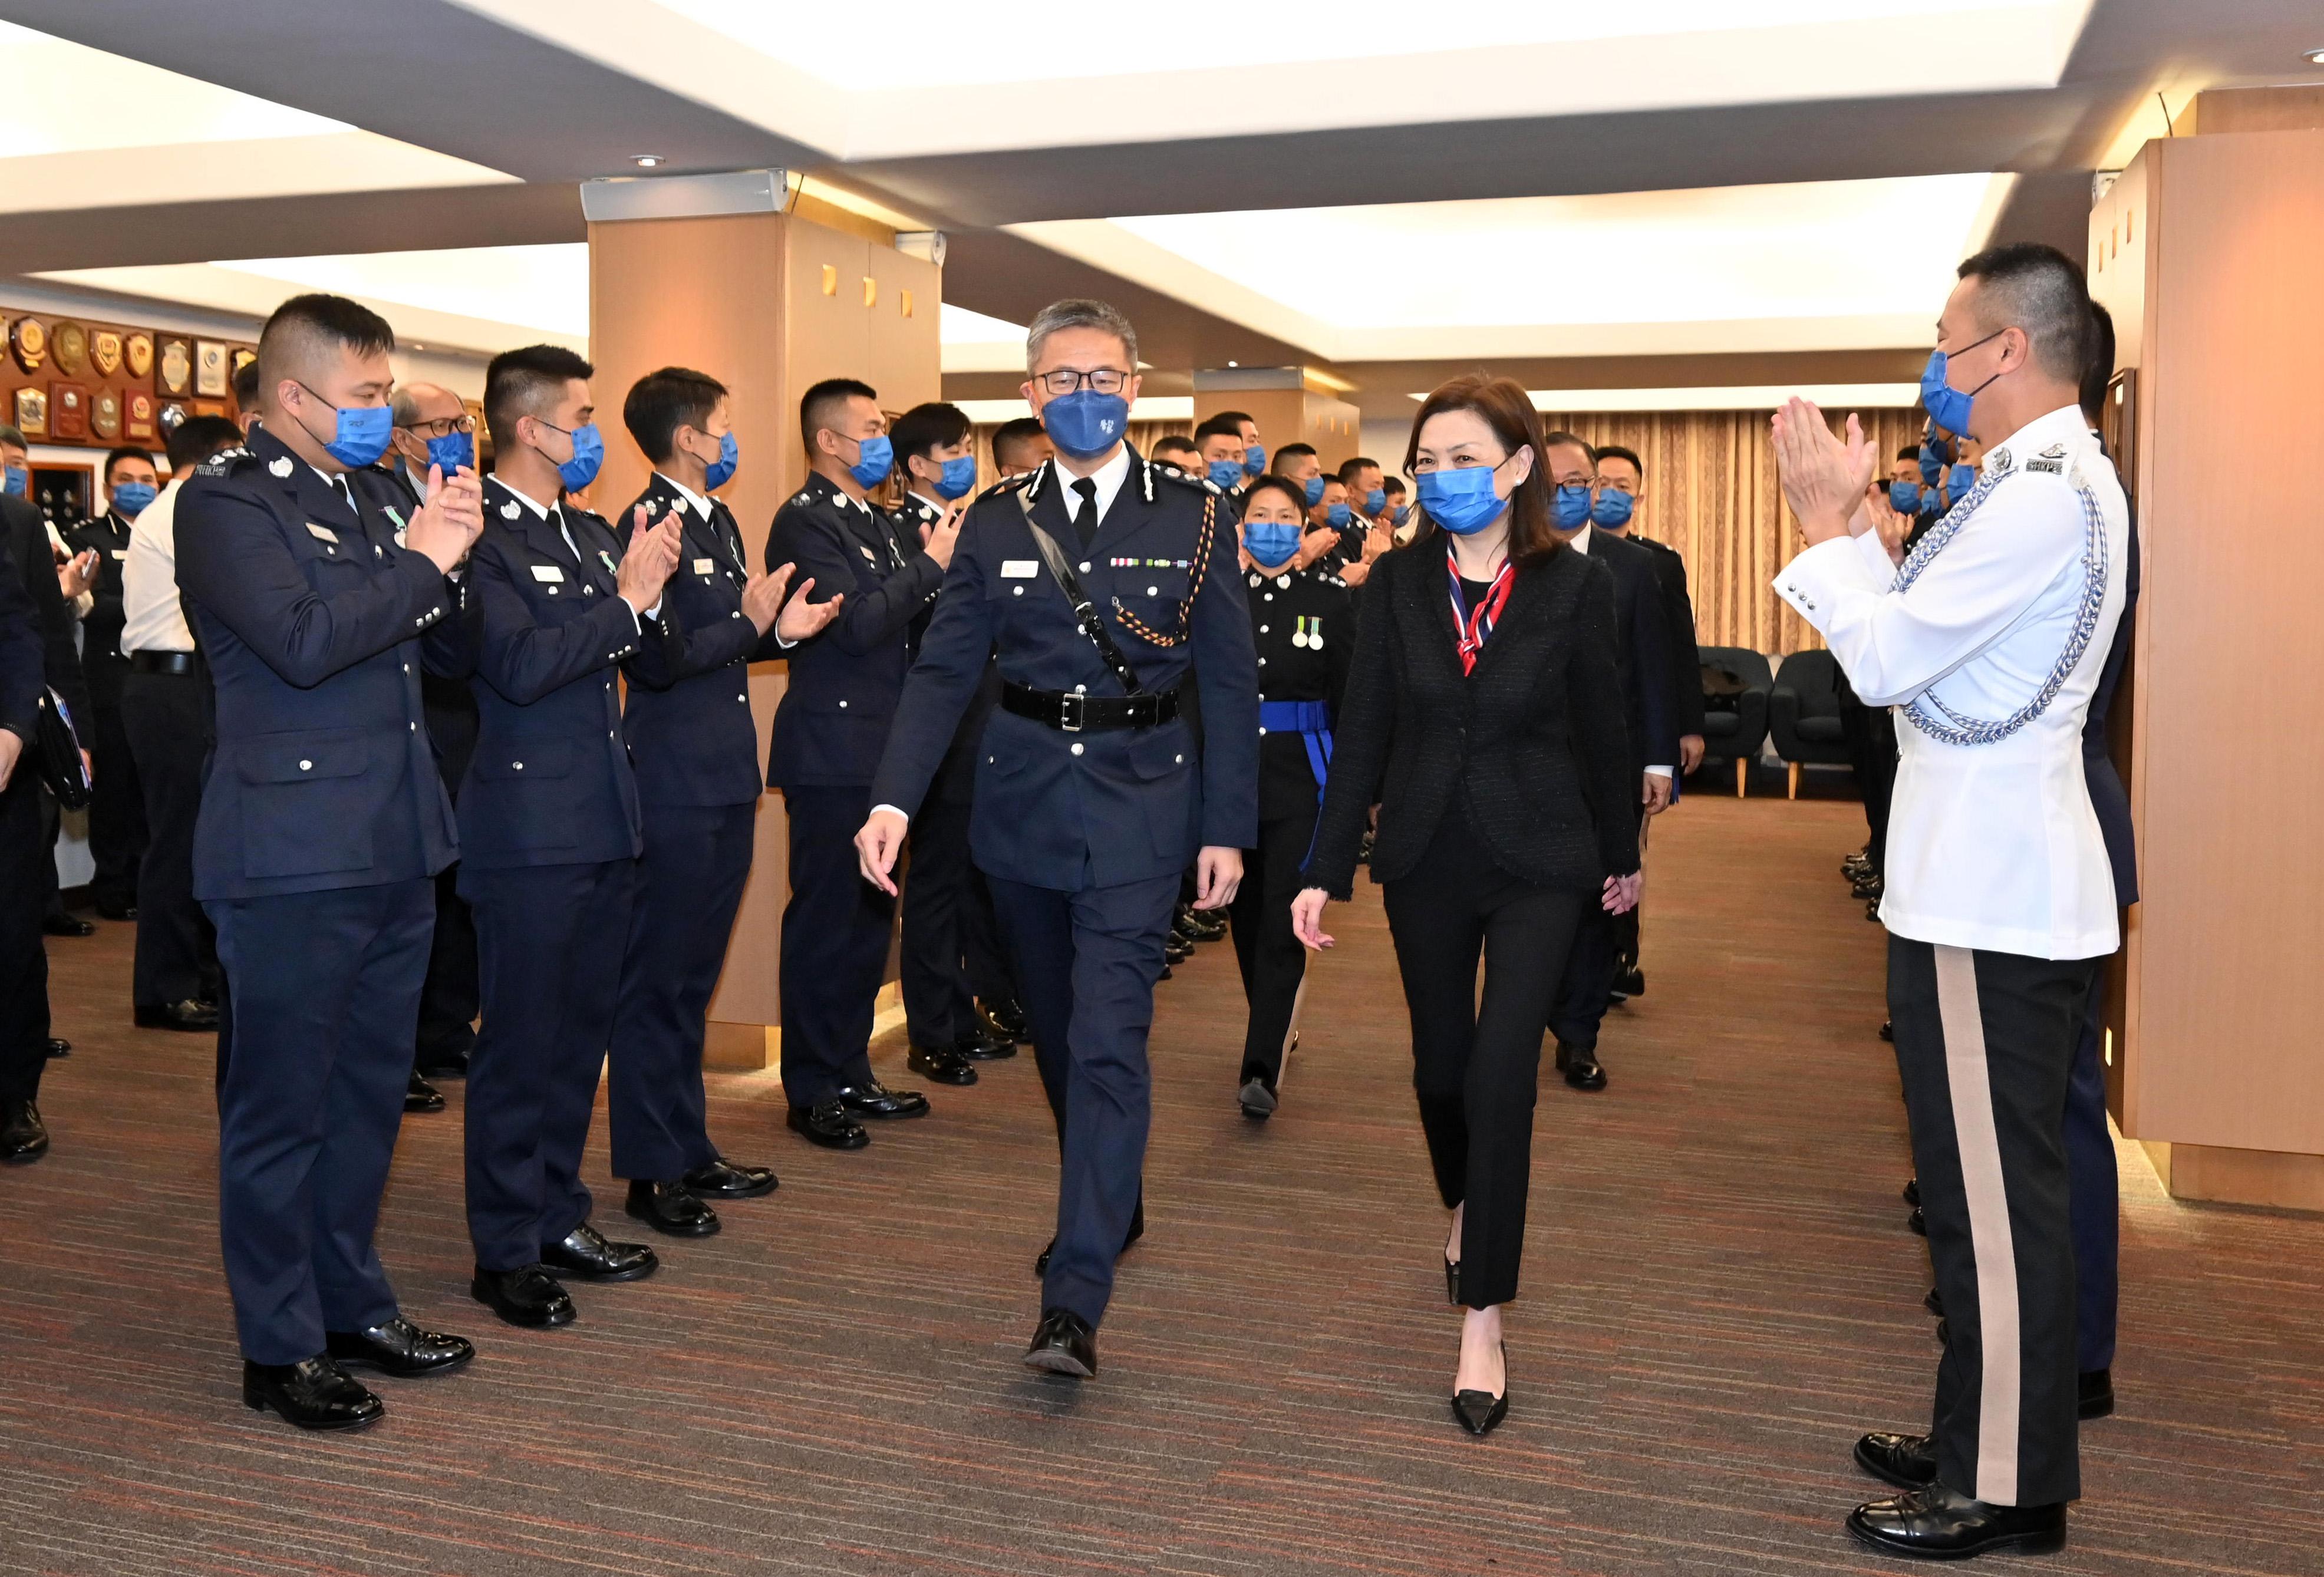 The Chairman of the Independent Police Complaints Council, Ms Priscilla Wong Pui-sze (second right), and the Commissioner of Police, Mr Siu Chak-yee (third right), congratulate the probationary inspectors after the passing-out parade held at the Hong Kong Police College today (February 11).